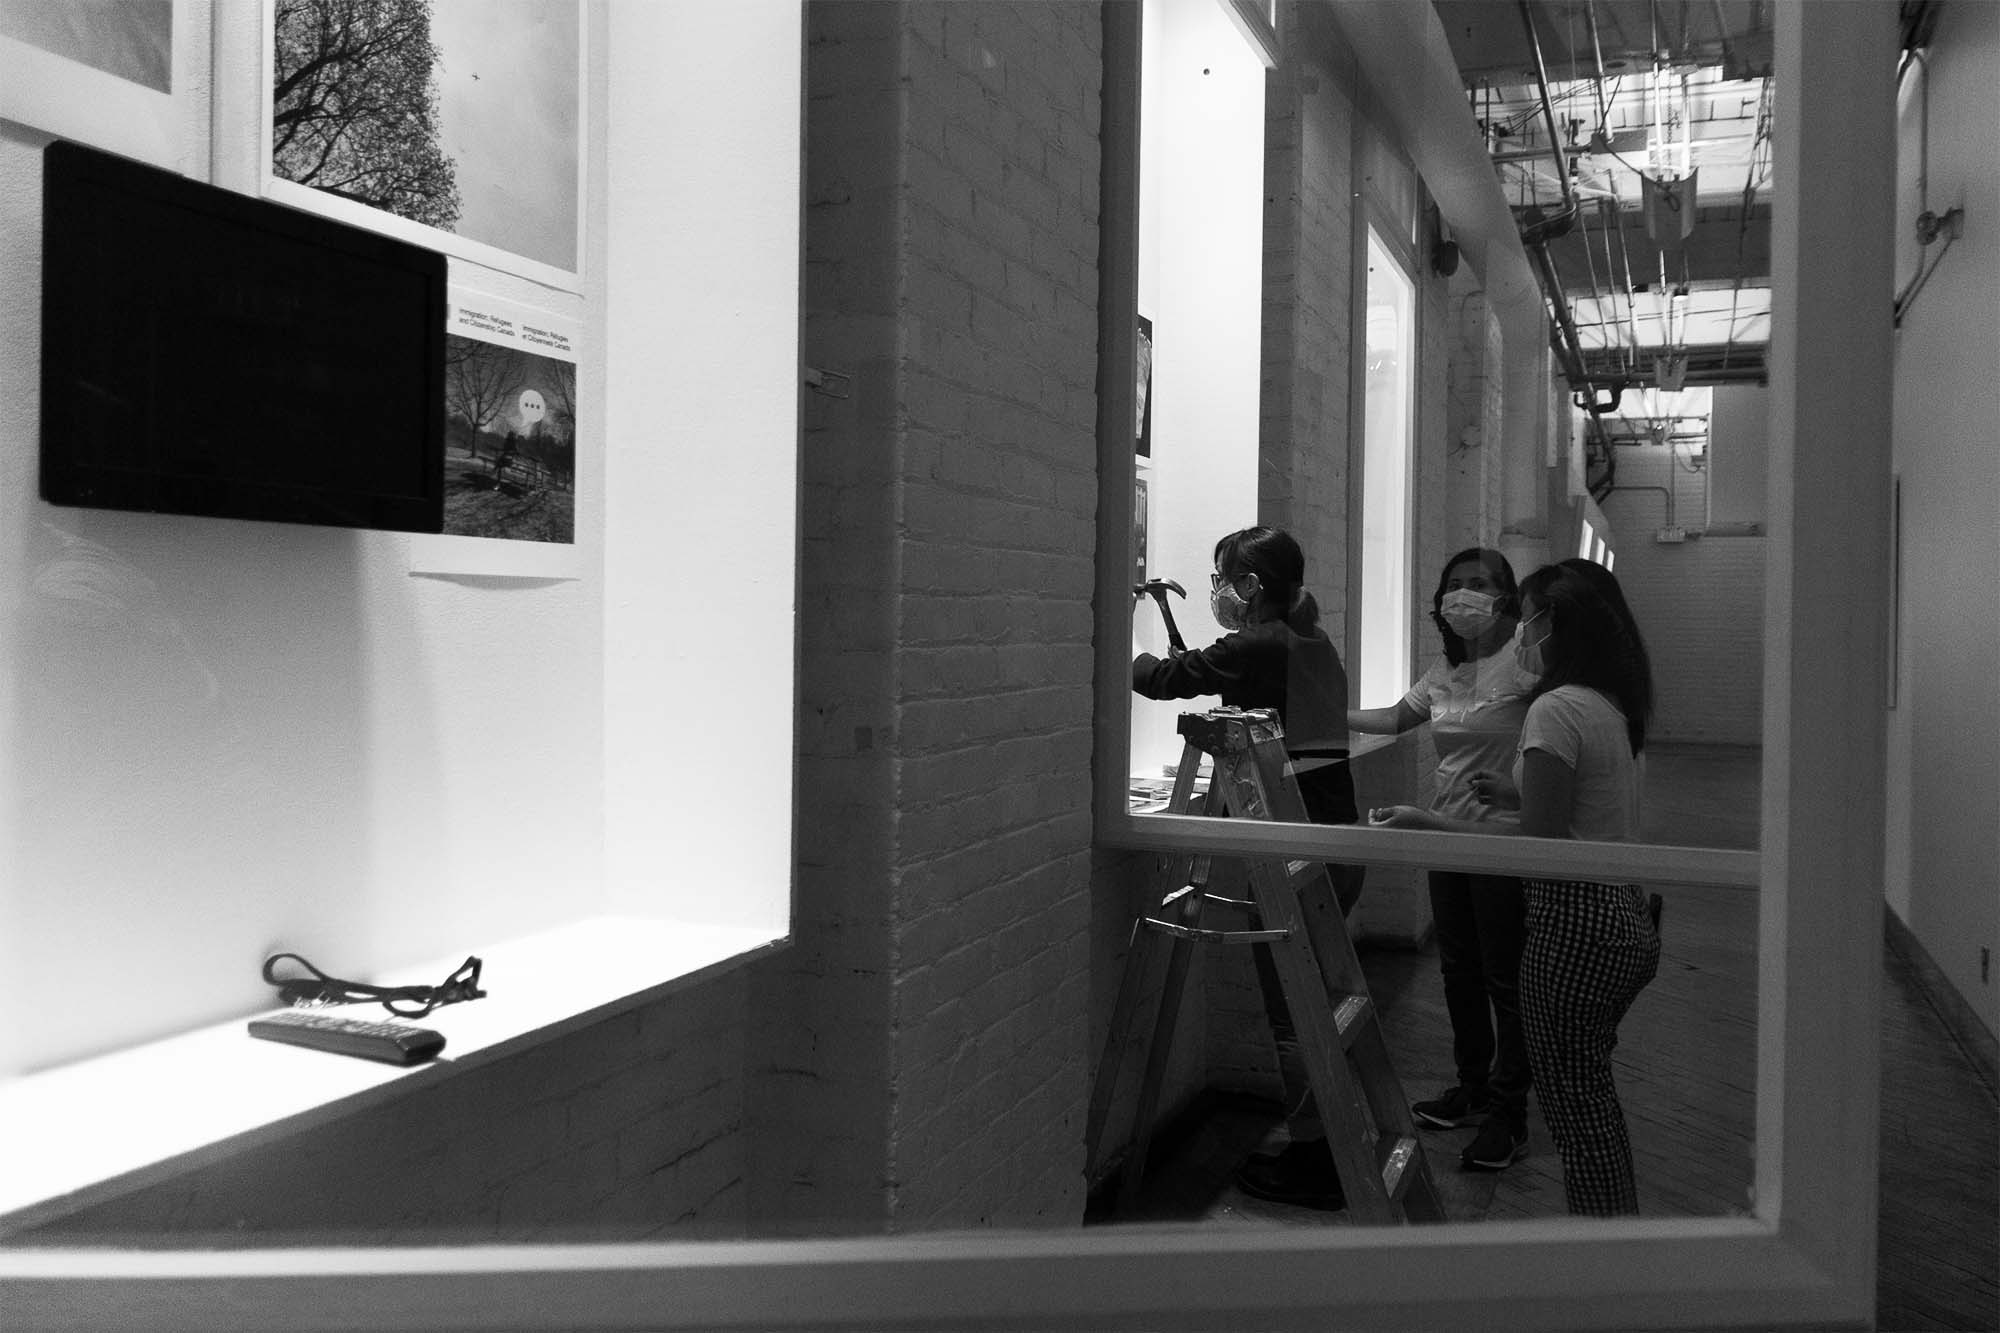 3 people installing exhibition in A Space gallery windows